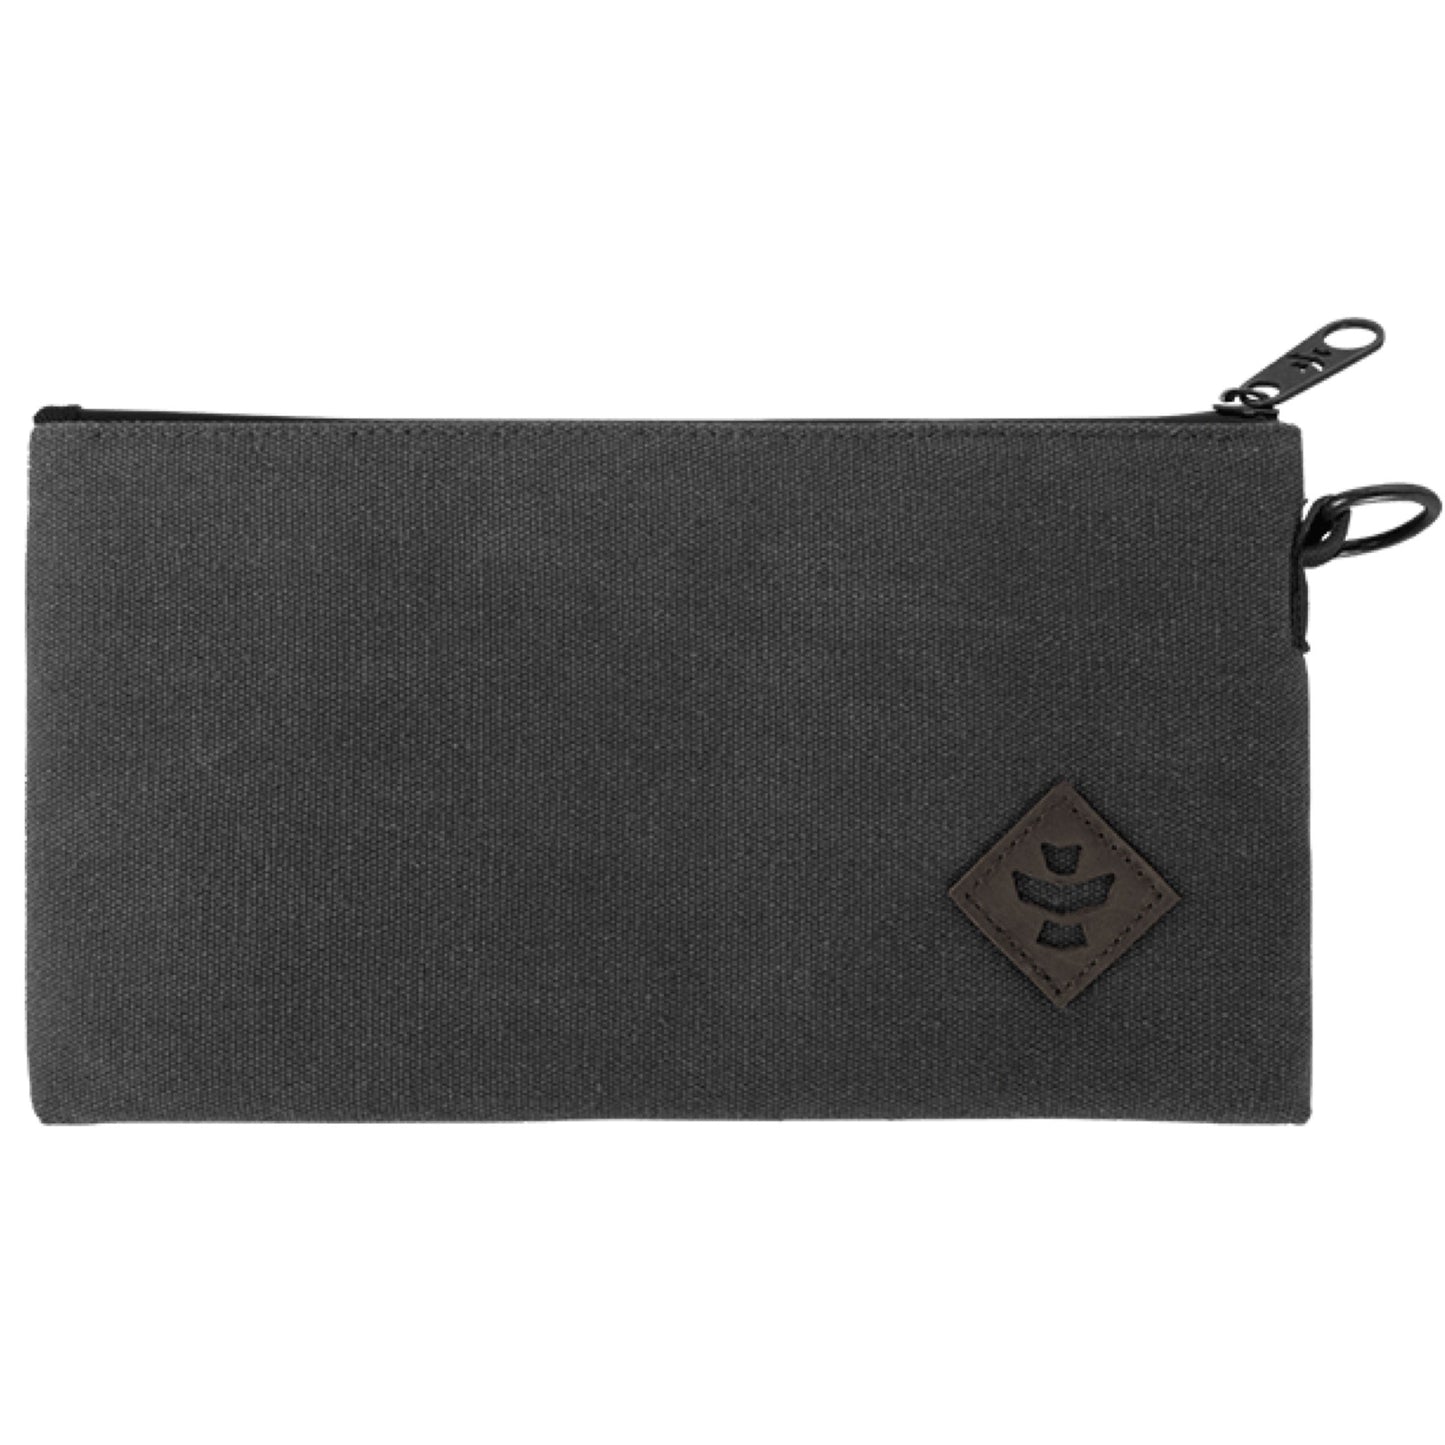 Revelry Smell-Proof Broker Bag by Revelry Supply | Mission Dispensary